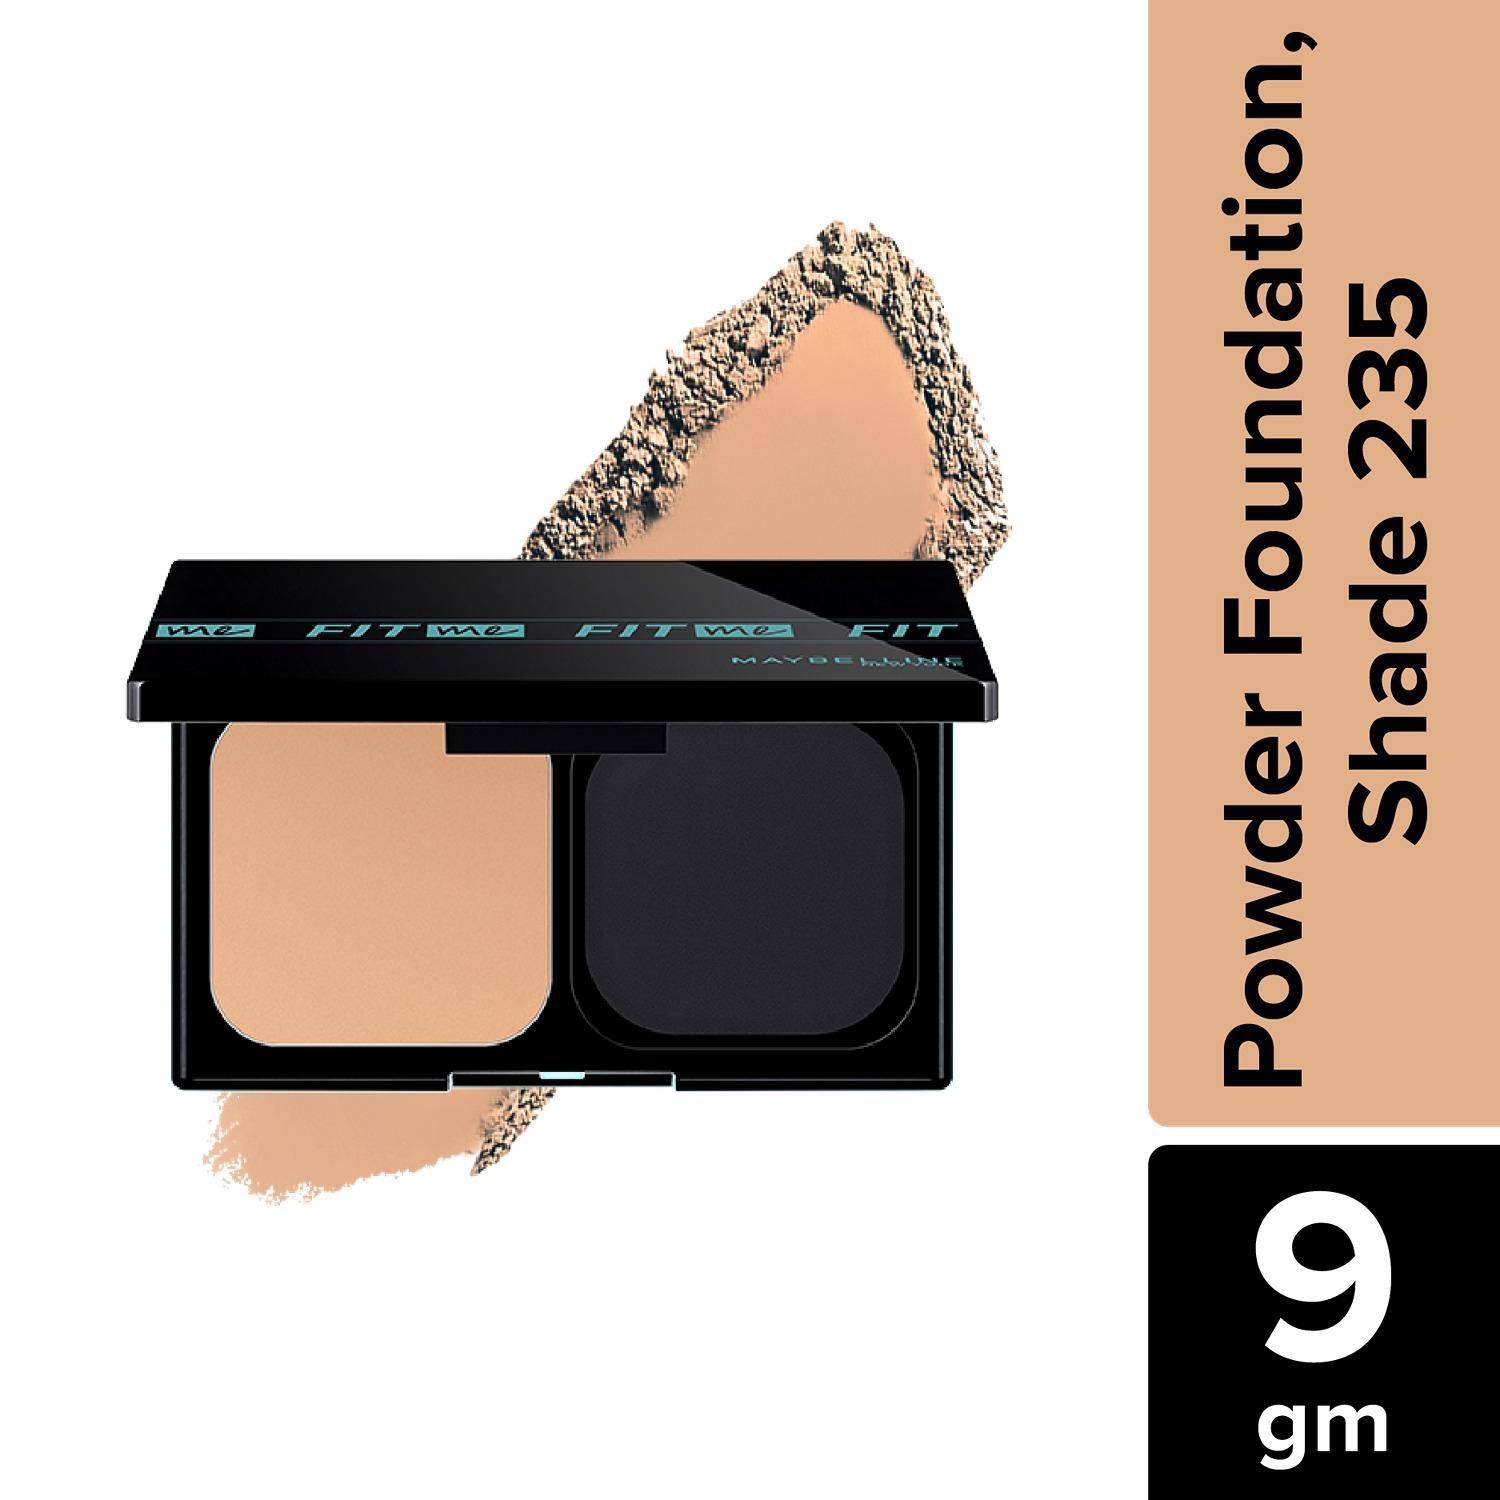 maybelline new york fit me ultimate powder foundation - shade 310 (9g)